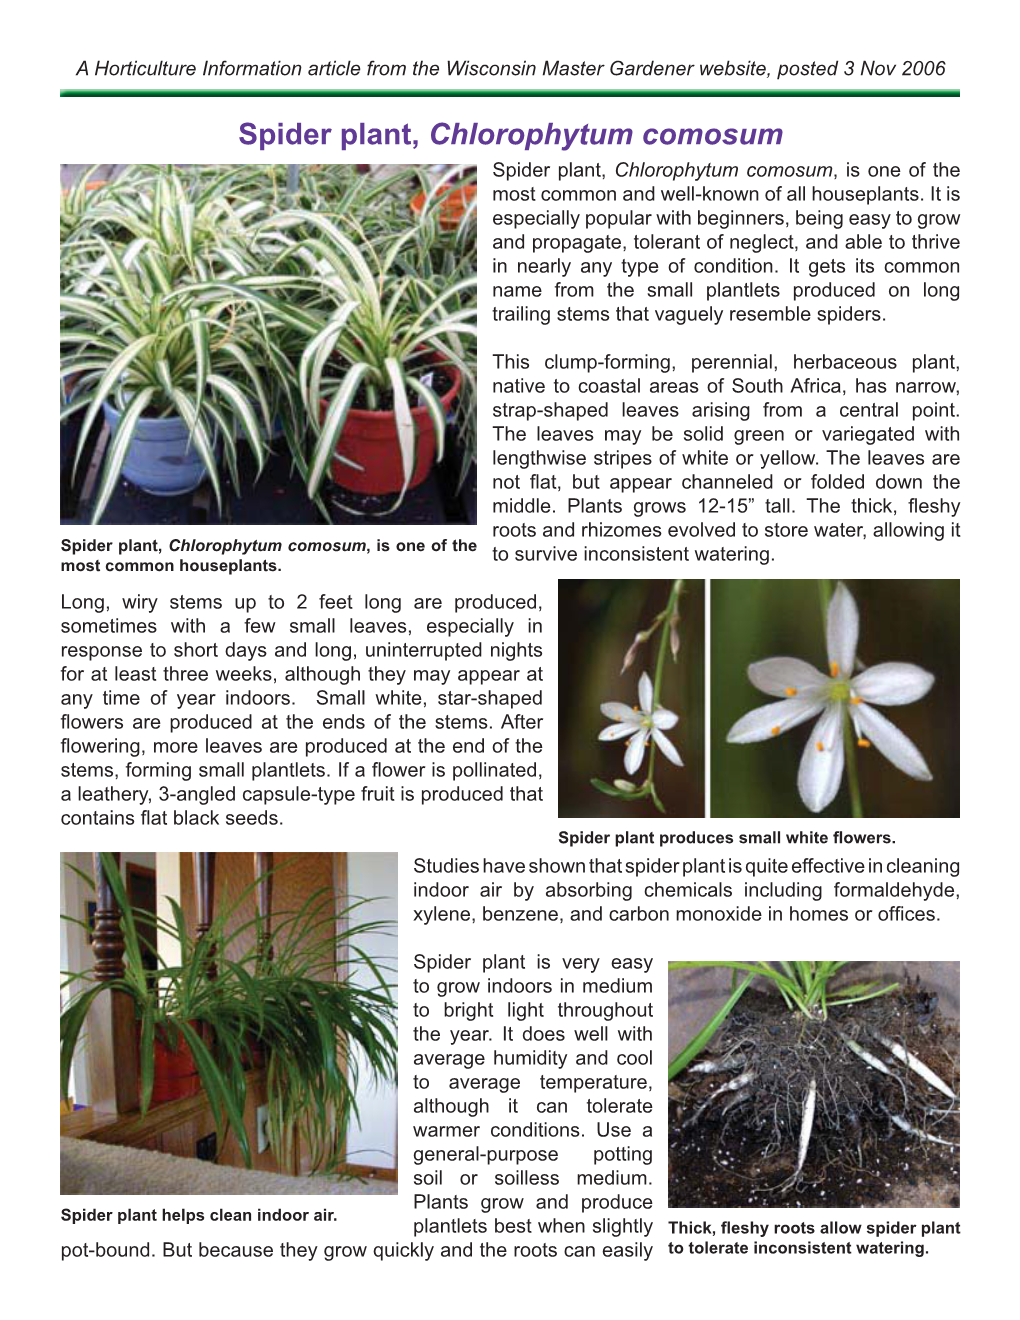 Spider Plant, Chlorophytum Comosum Spider Plant, Chlorophytum Comosum, Is One of the Most Common and Well-Known of All Houseplants